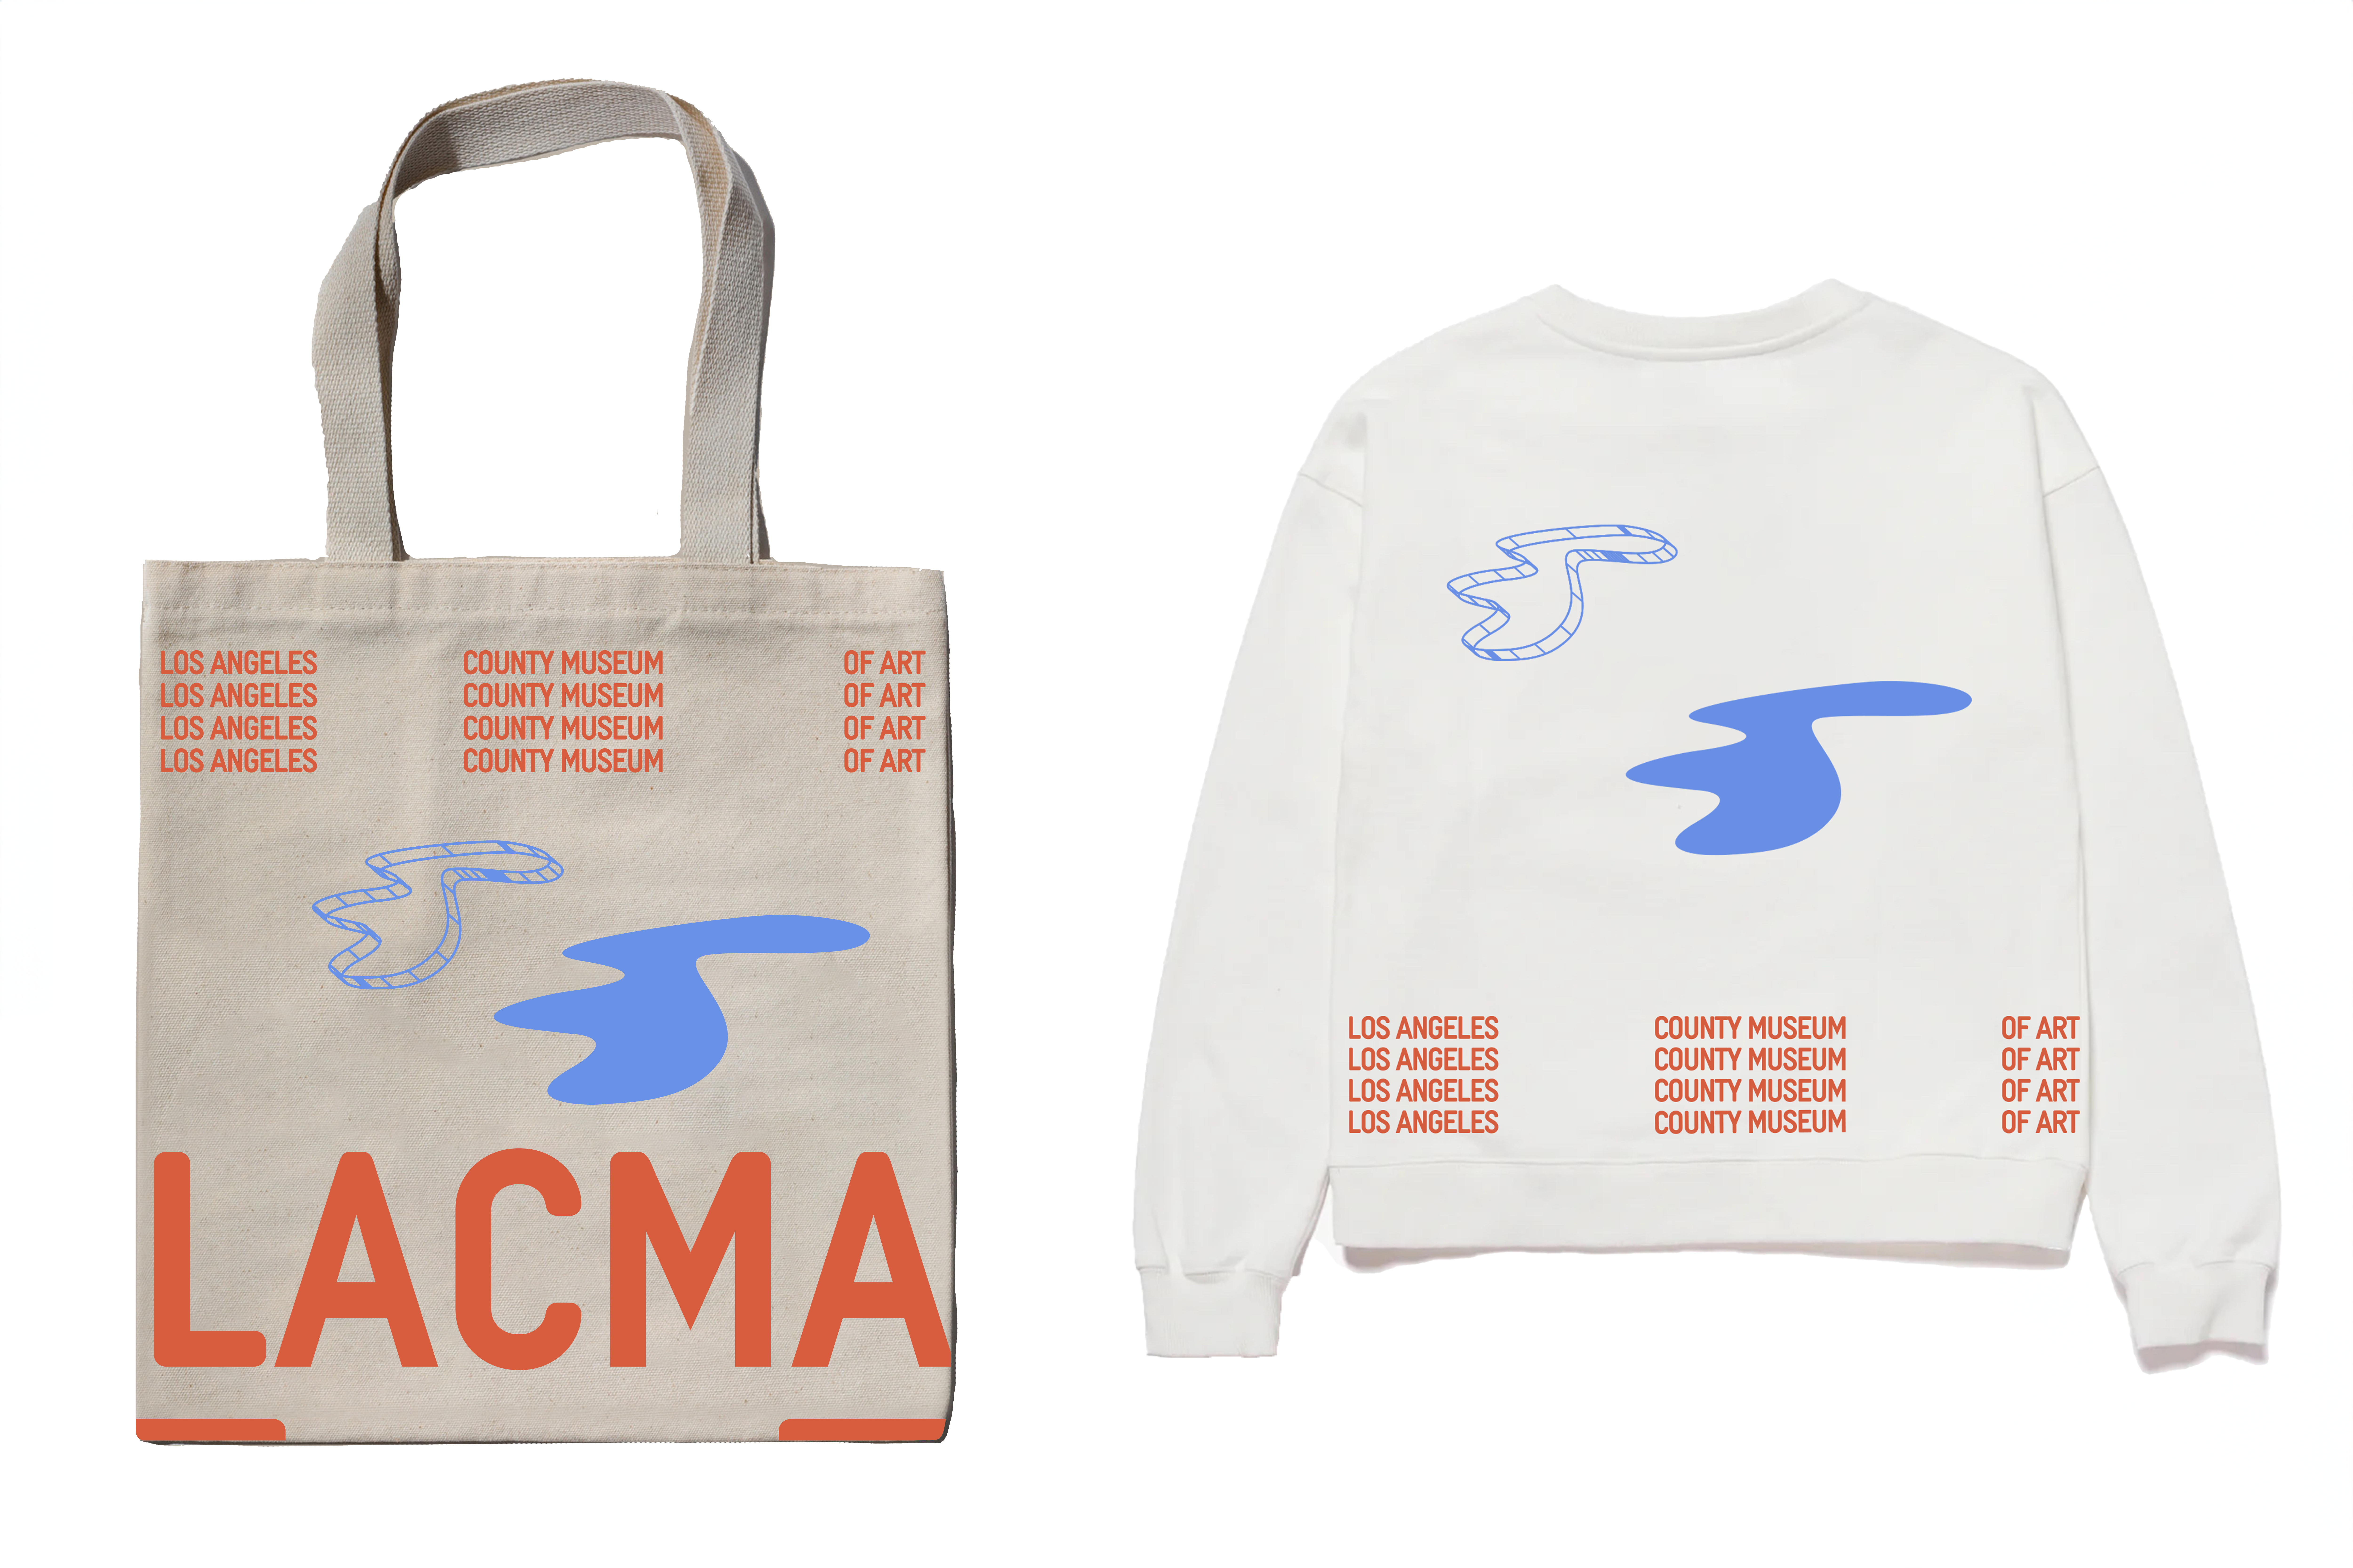 LACMA Signature Product Line by Design Lab students